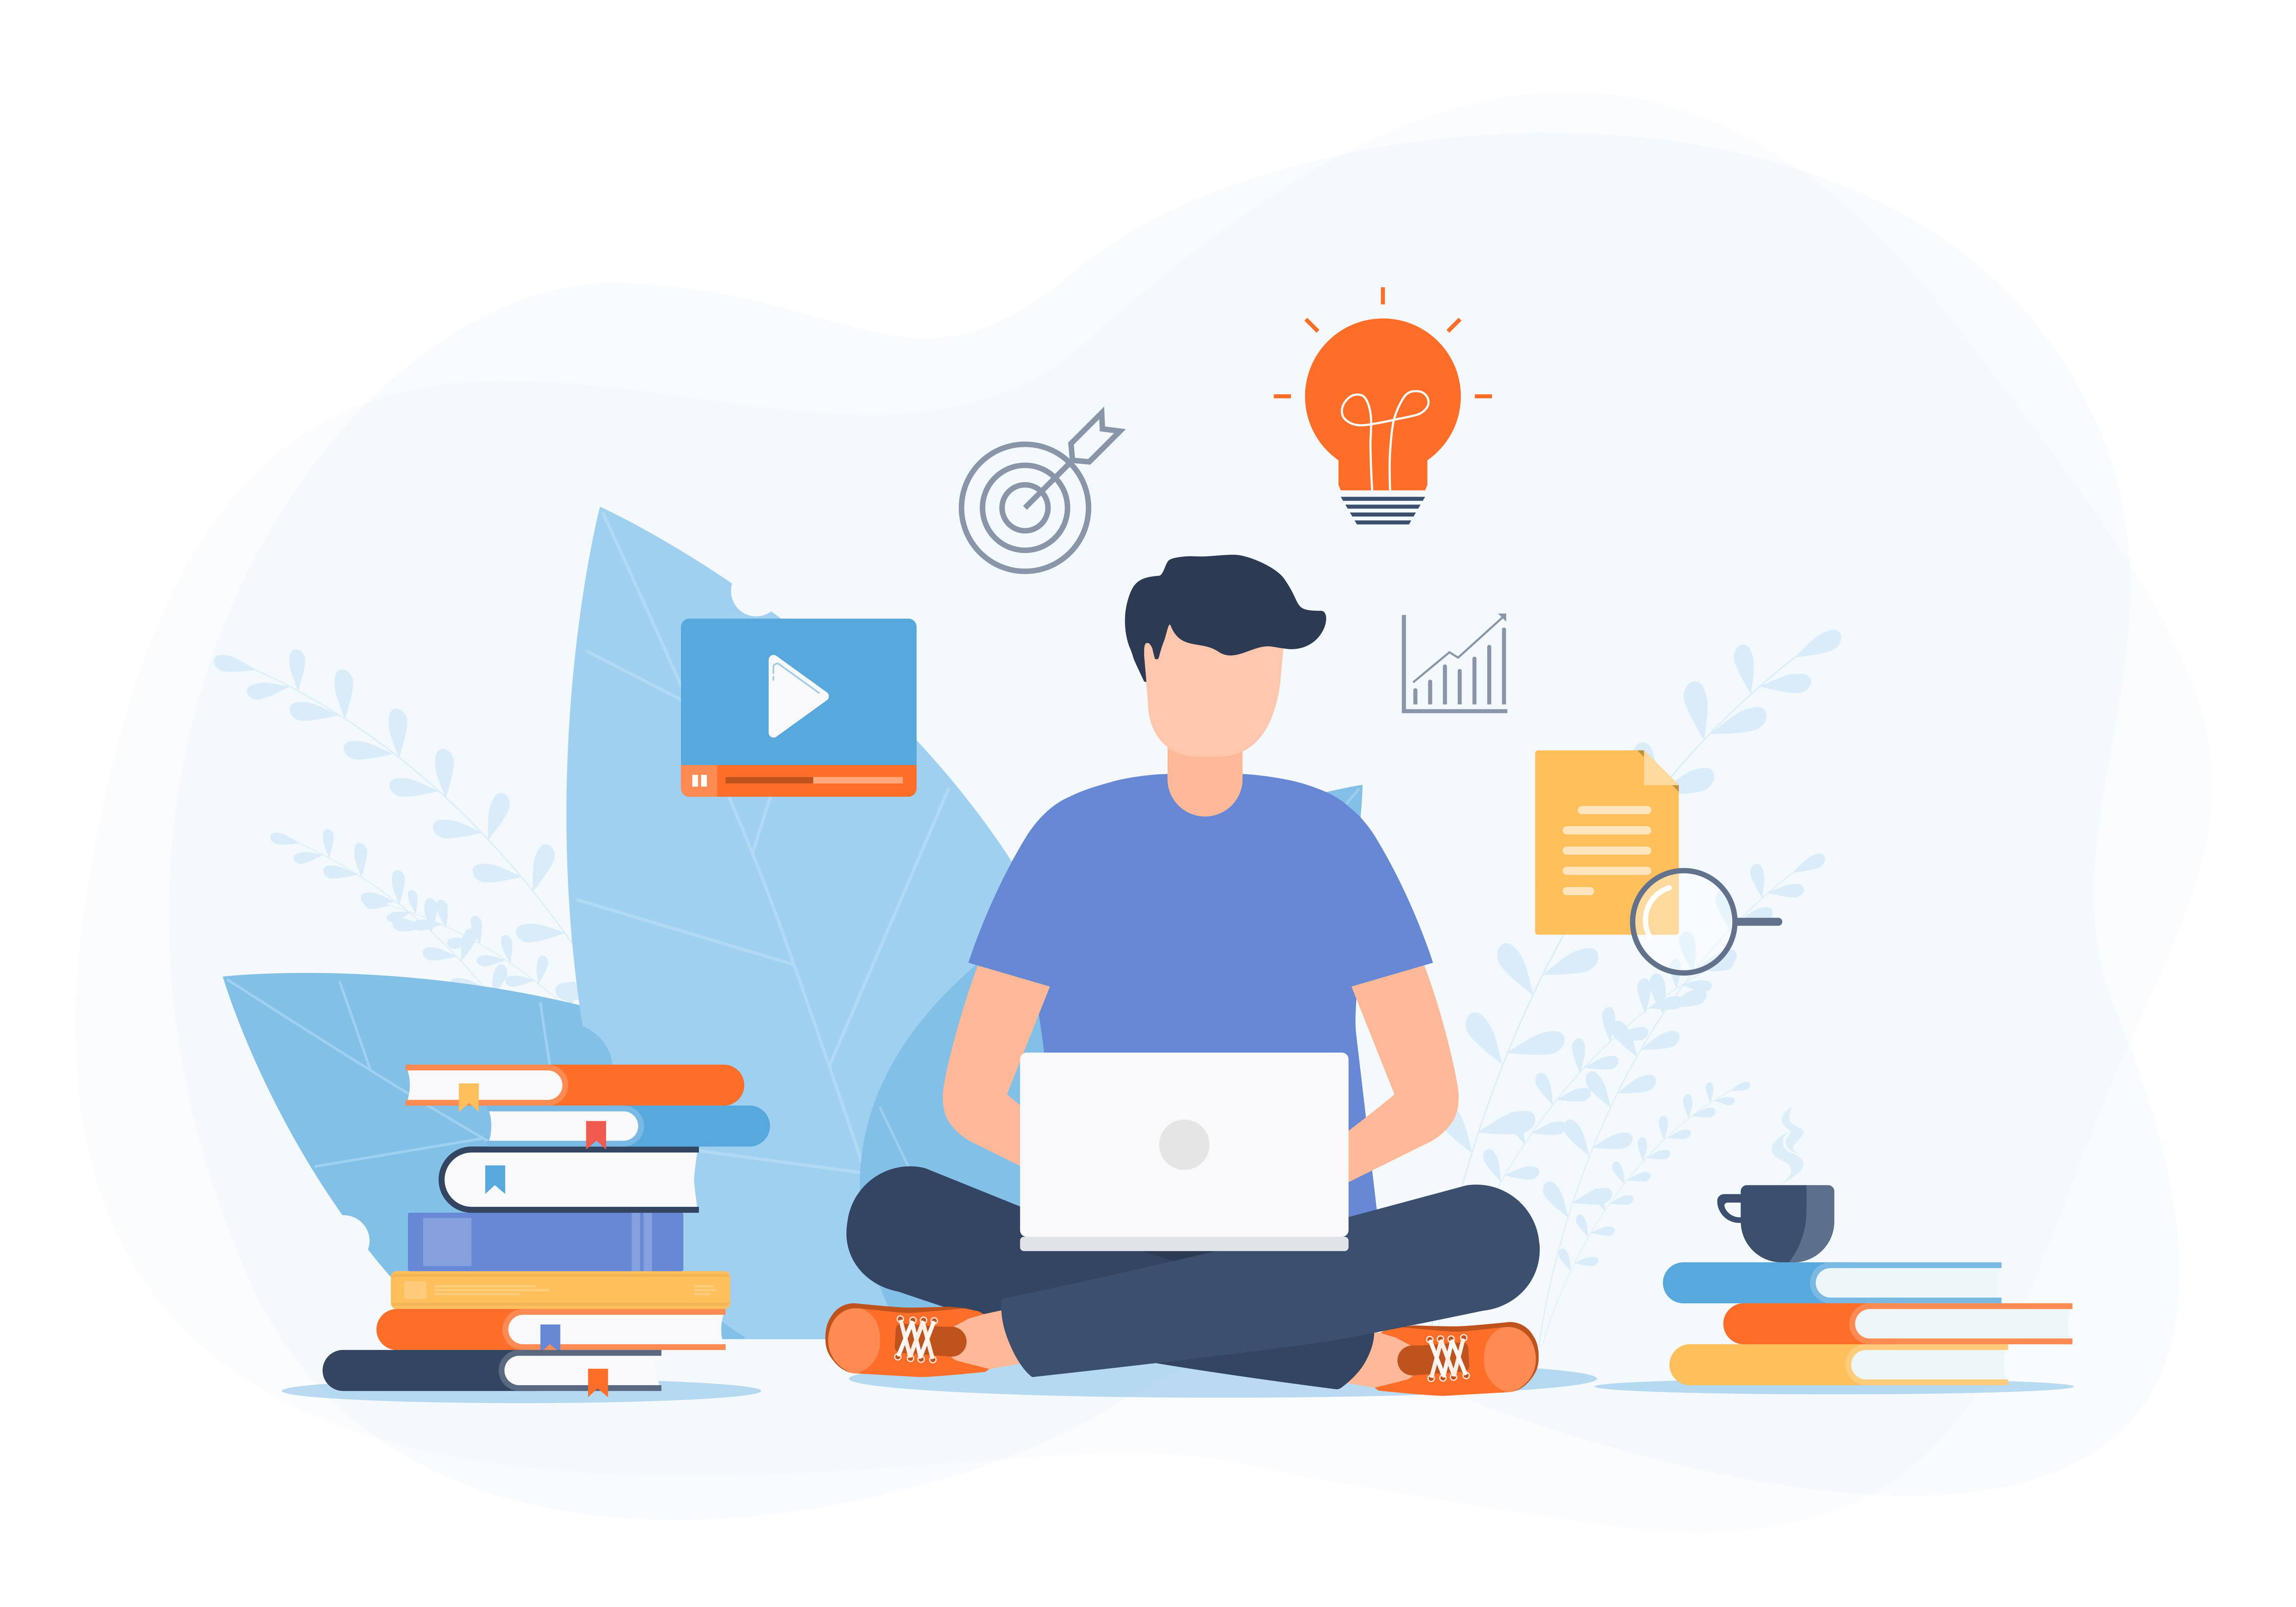 illustration showing a student sitting cross legged on the floor with laptop surrounded by stacks of books, a cup of coffee, and icons for documents, videos, ideas, and graphs